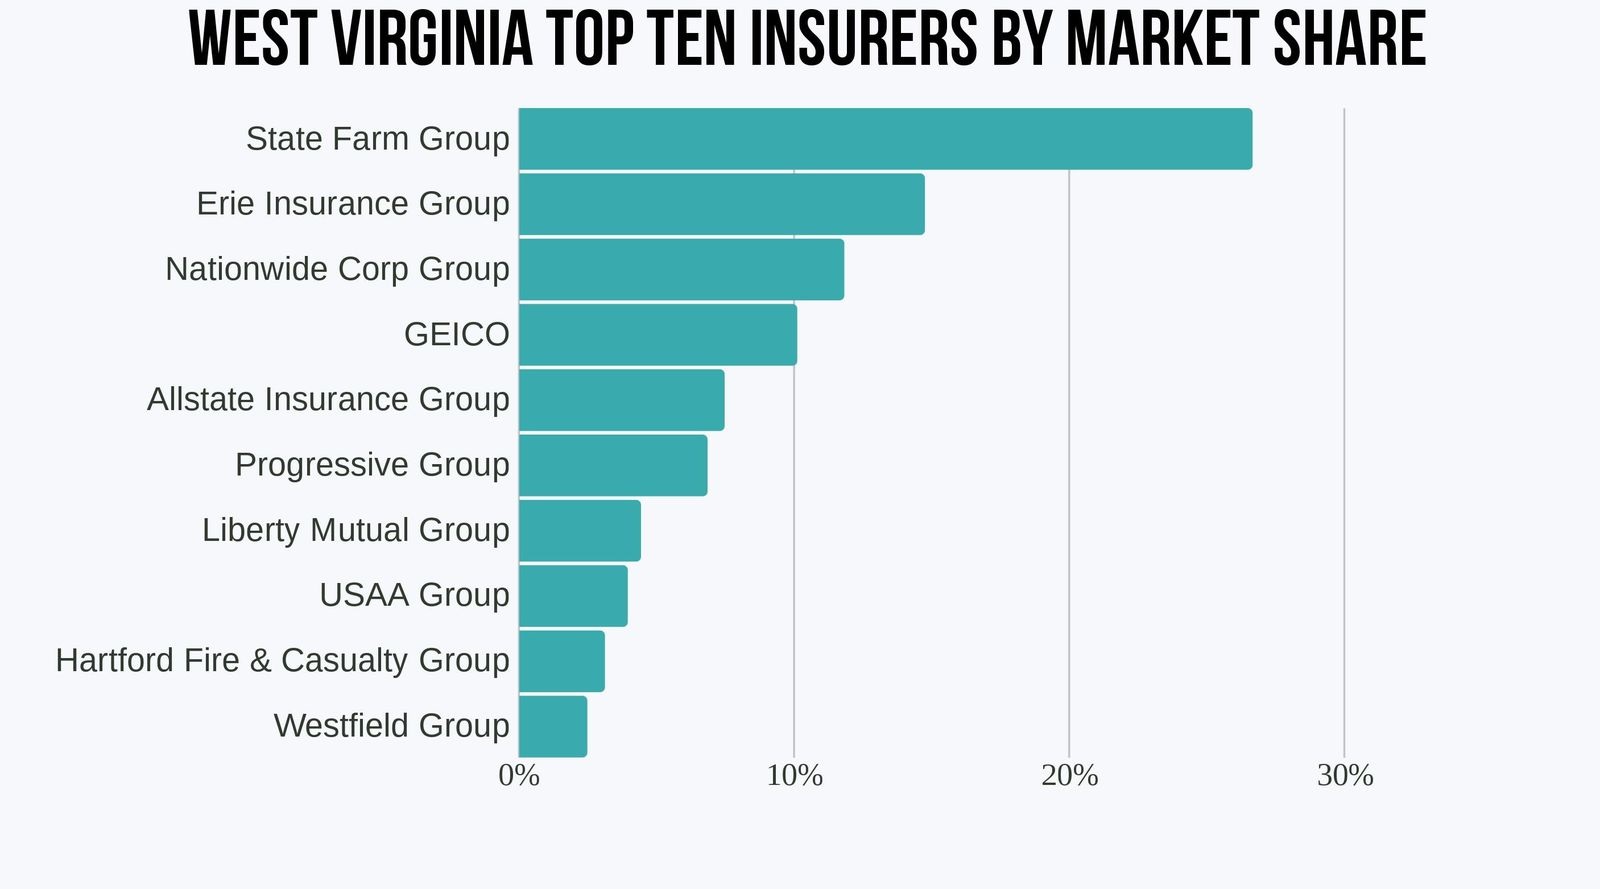 Bar graph of West Virginia's Top 10 Insurers by Market Share